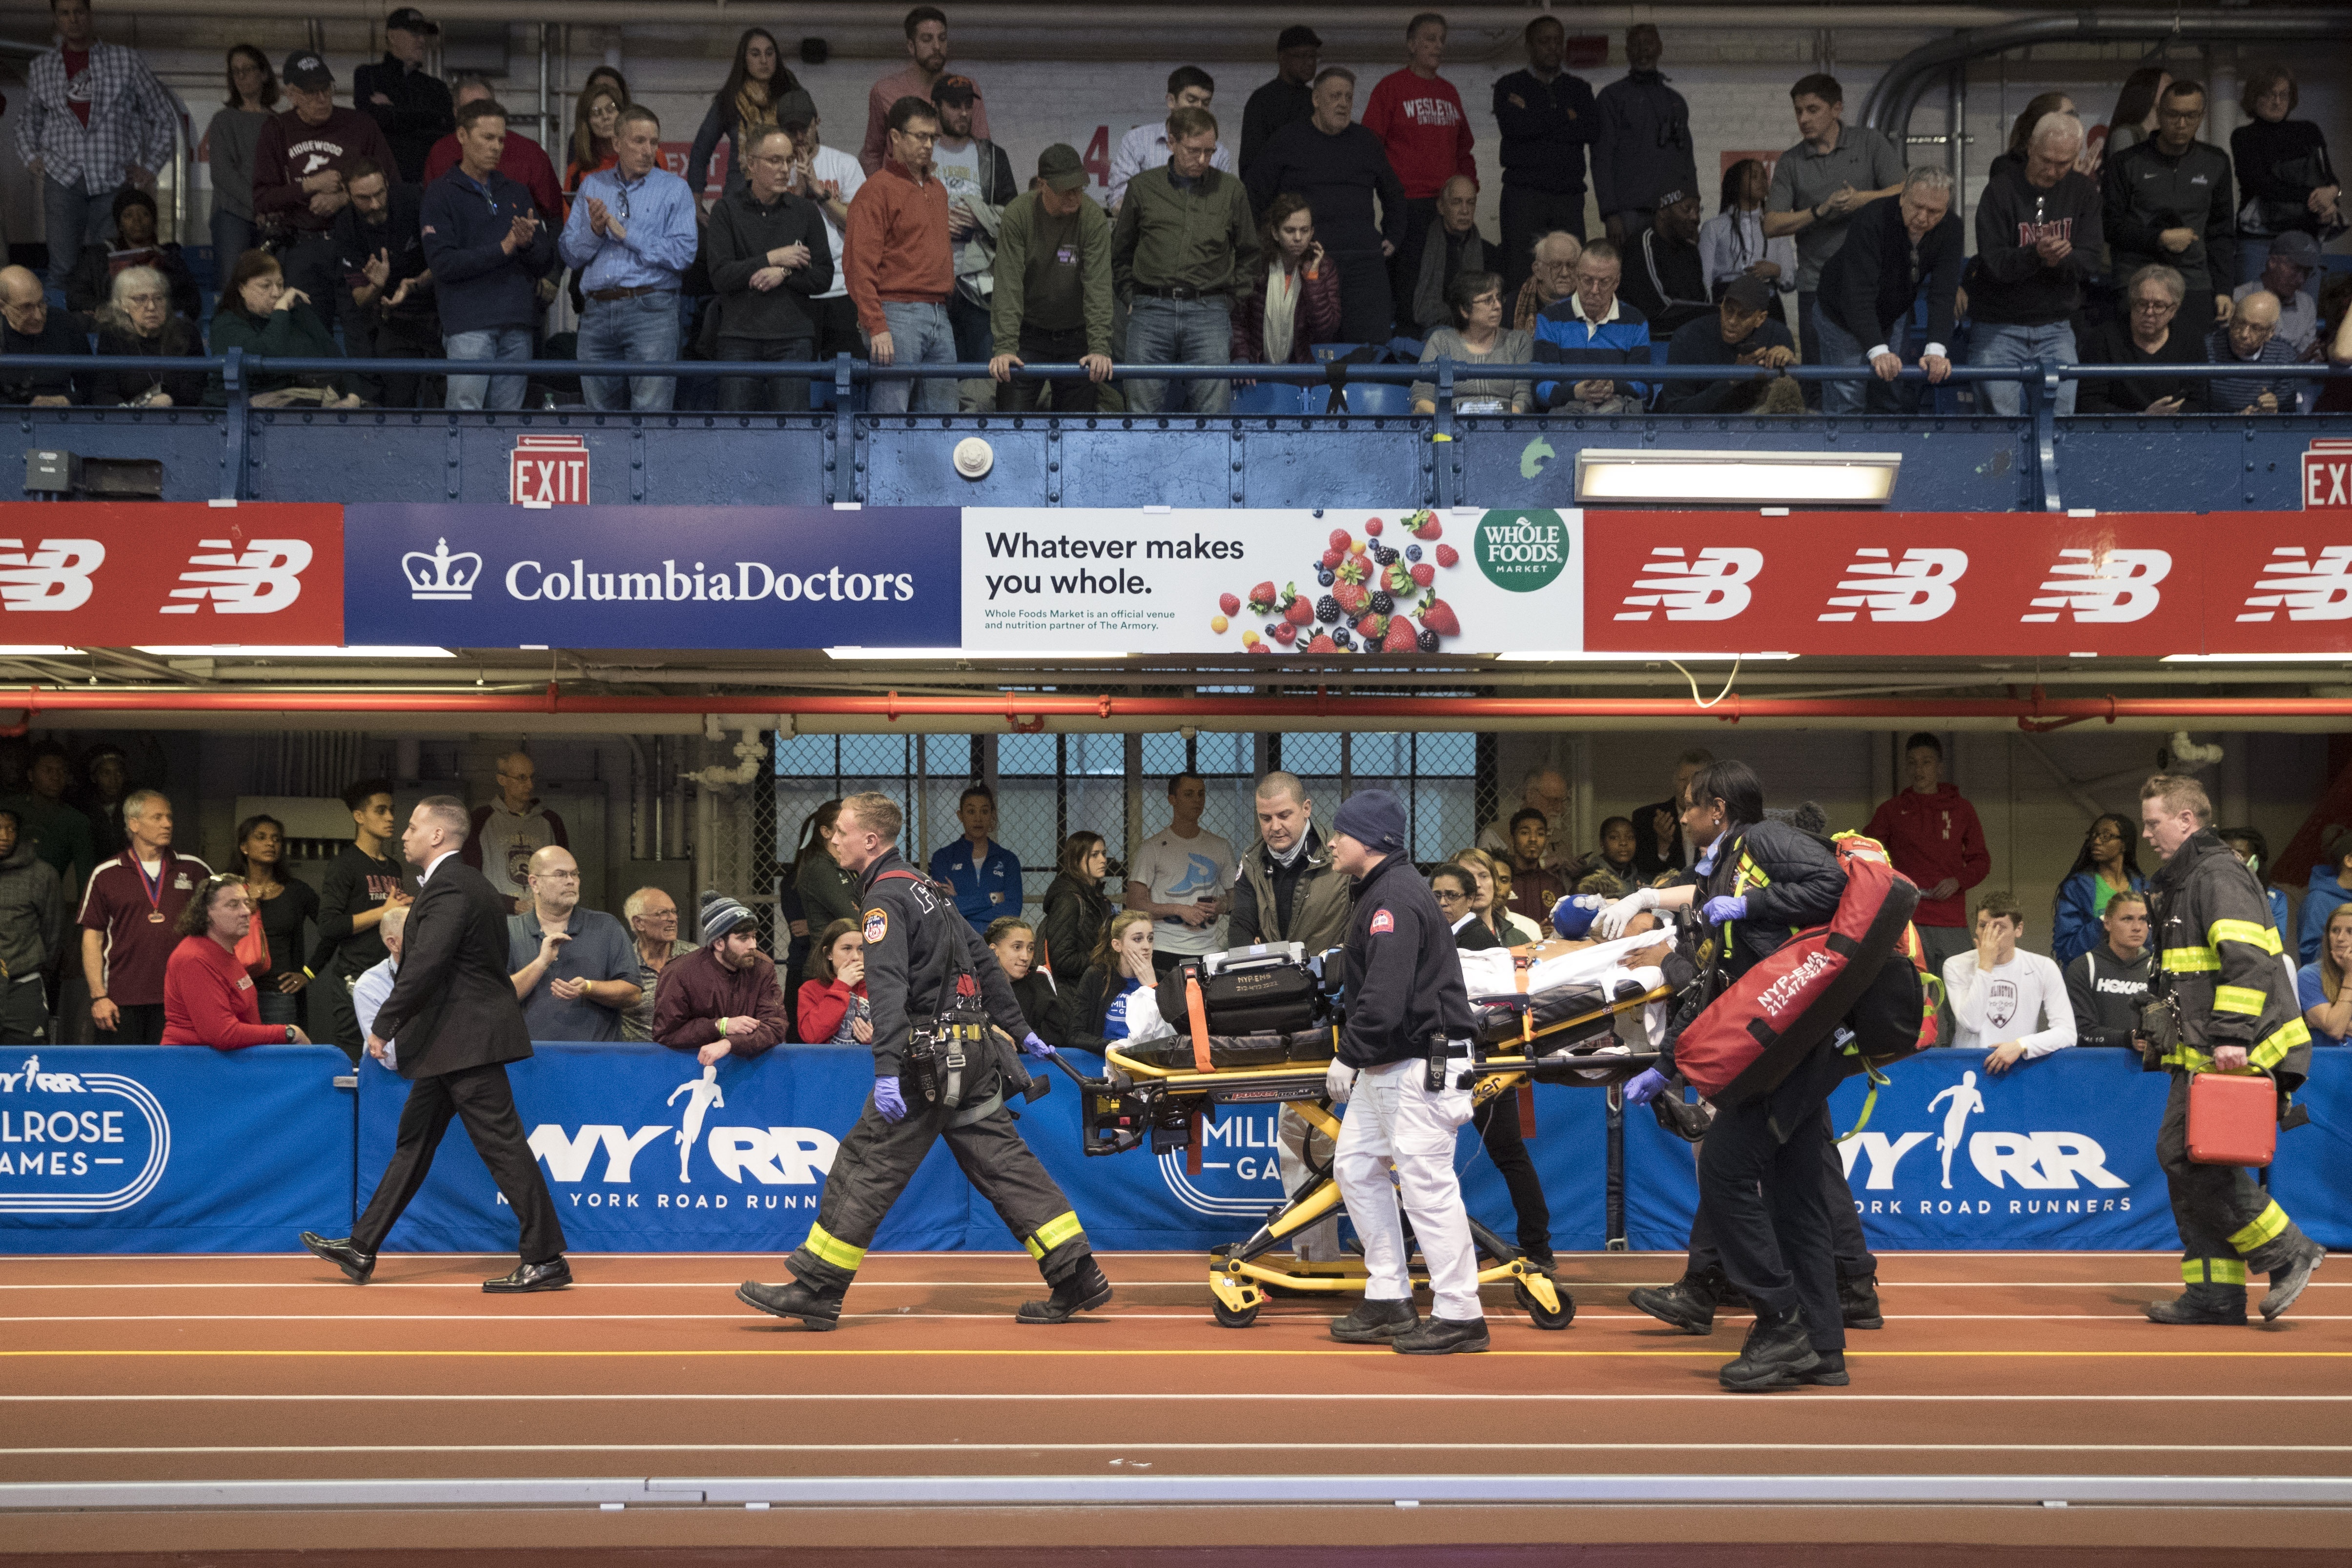 Emergency Service personnel remove Kemoy Campbell, of Jamaica, from the track after he collapsed during his duty as a pacesetter in the men's 3000-meter race at the Millrose Games track and field meet, Saturday, Feb. 9, 2019, in New York. (AP Photo/Mary Altaffer)